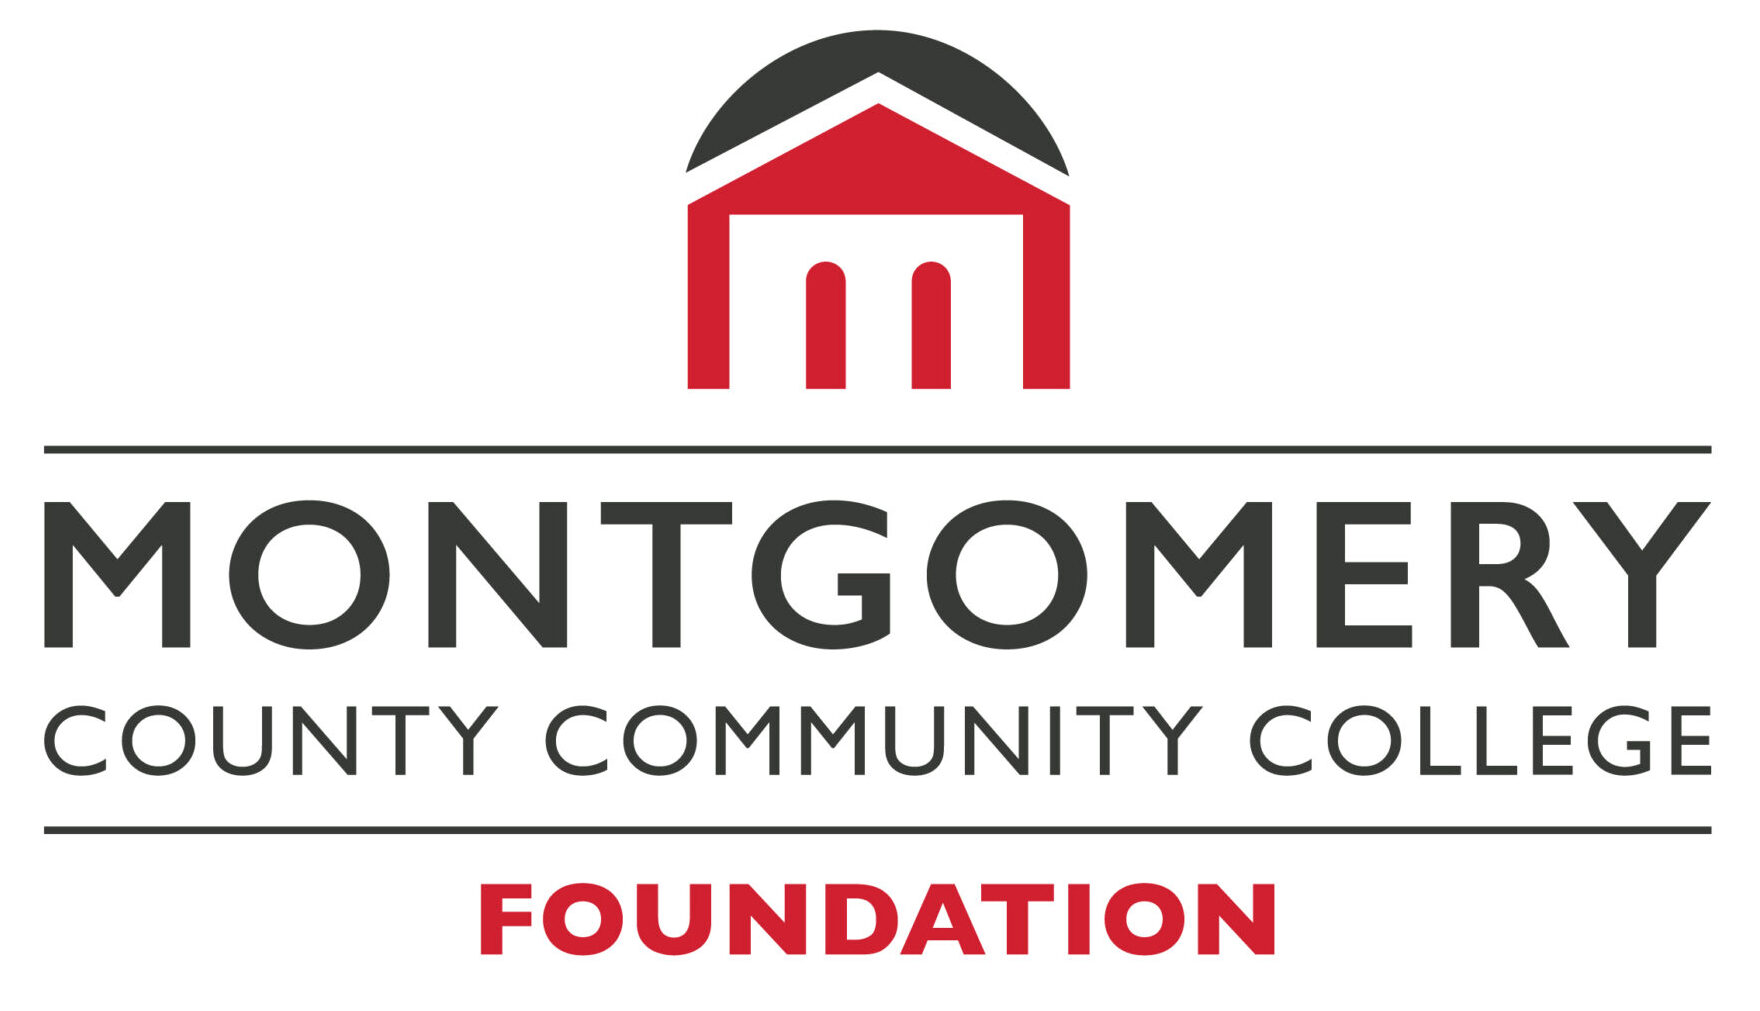 Montgomery County College Community Foundation logo featuring a red and black college building.